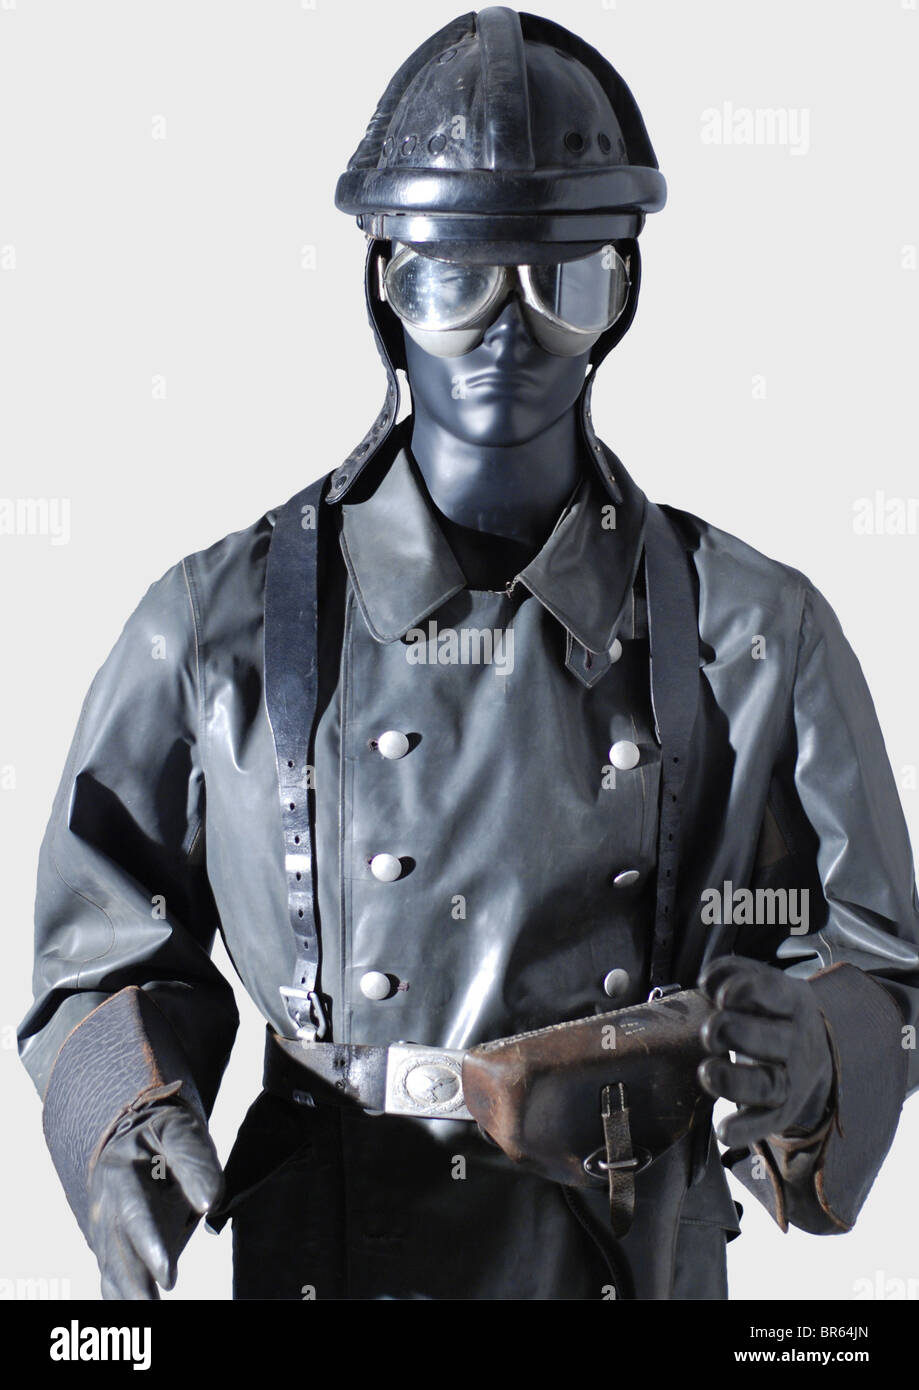 A Luftwaffe motorcycle suit., A black leather crash helmet with protective cylindrical padding, a one-piece neck protector with earflaps and chinstraps with snaps, straps above the visor, inset screened ventilation holes. Folded black cotton lining, stamped under the leather sweatband with 'G. Pose Leder GmbH Hn(?) 0 34' (G. Pose Leather GmbH Hn 0(?) 34) and the acceptance mark 'L.B.A.B. 37'. Size 59. A very rare helmet, as only a few were issued during a period of a few weeks. The rest were used later with military gliders. Also a greyish rubberised linen prot, Stock Photo